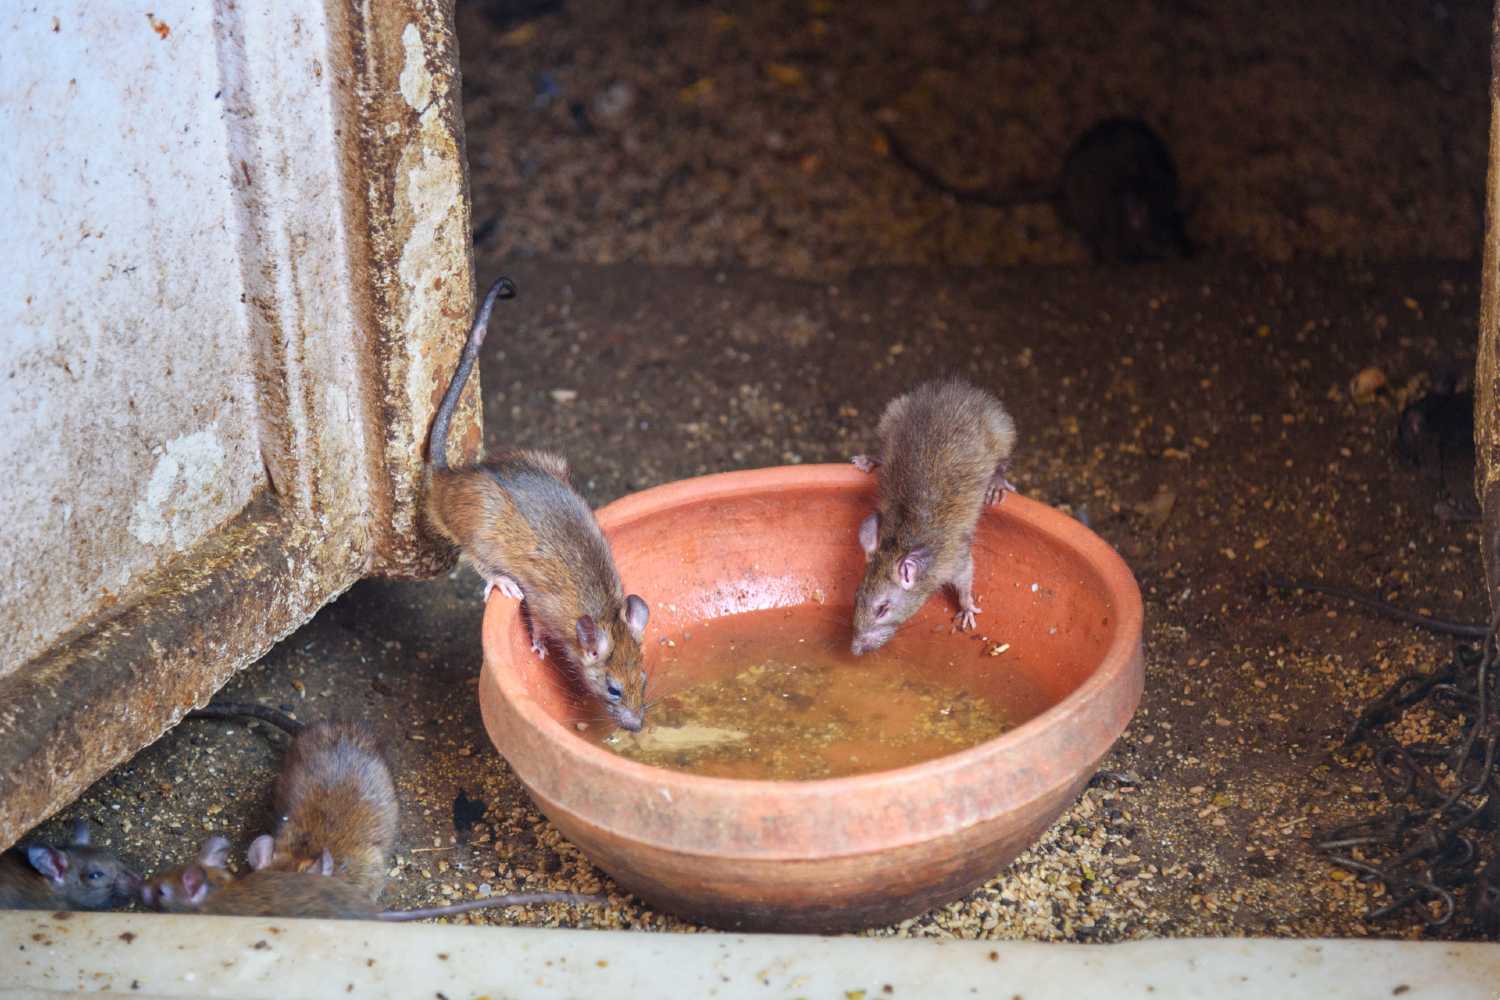 Rats drinking water from a pot